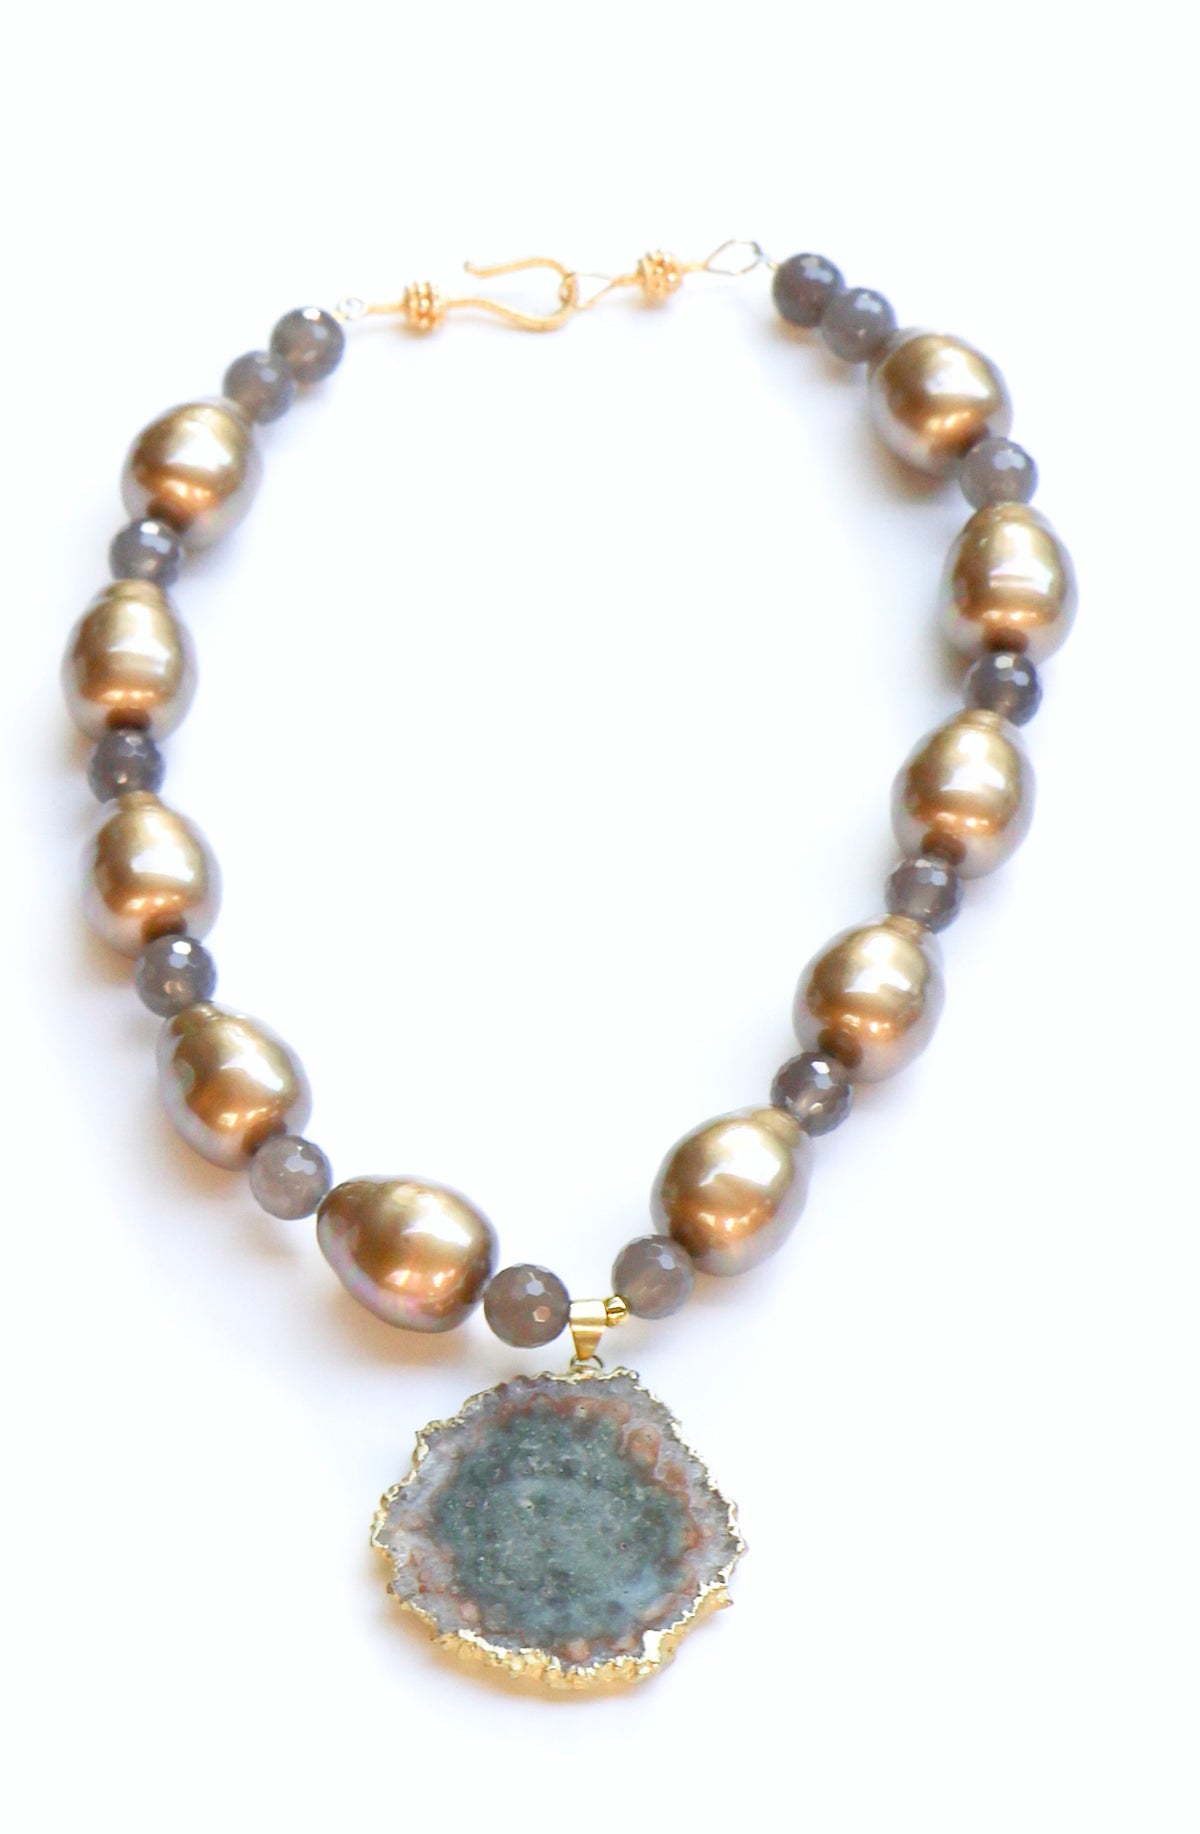 GOLD PEARL NECKLACE WITH DRUSY PENDANT